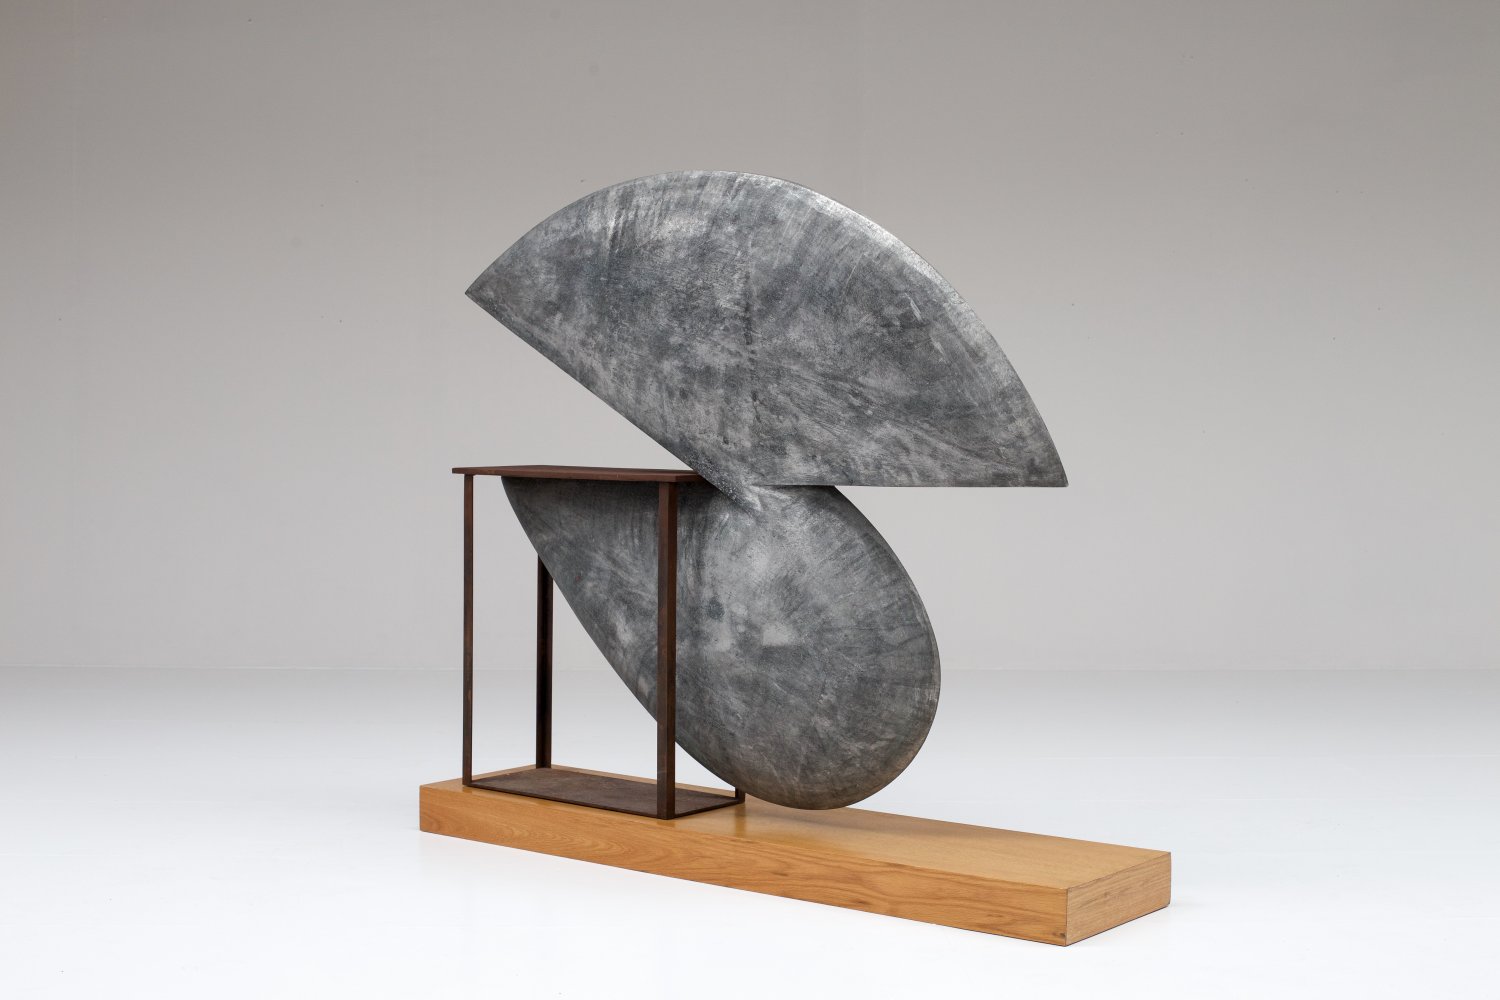 Sculpture by Win Knowlton